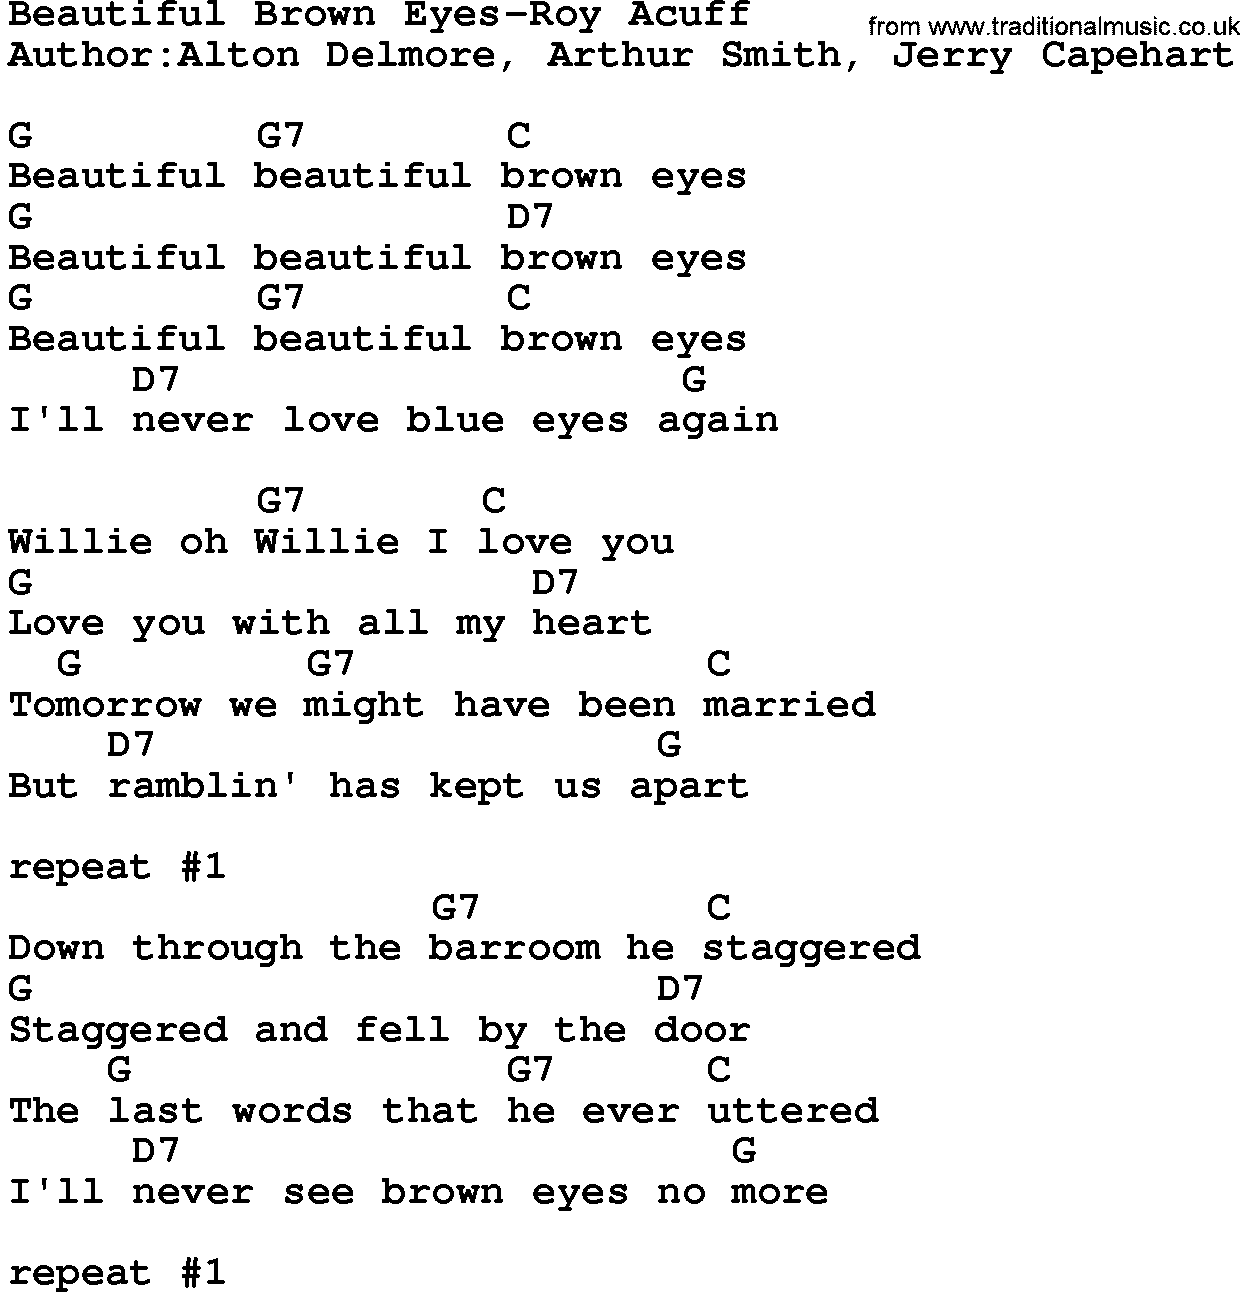 Country music song: Beautiful Brown Eyes-Roy Acuff  lyrics and chords